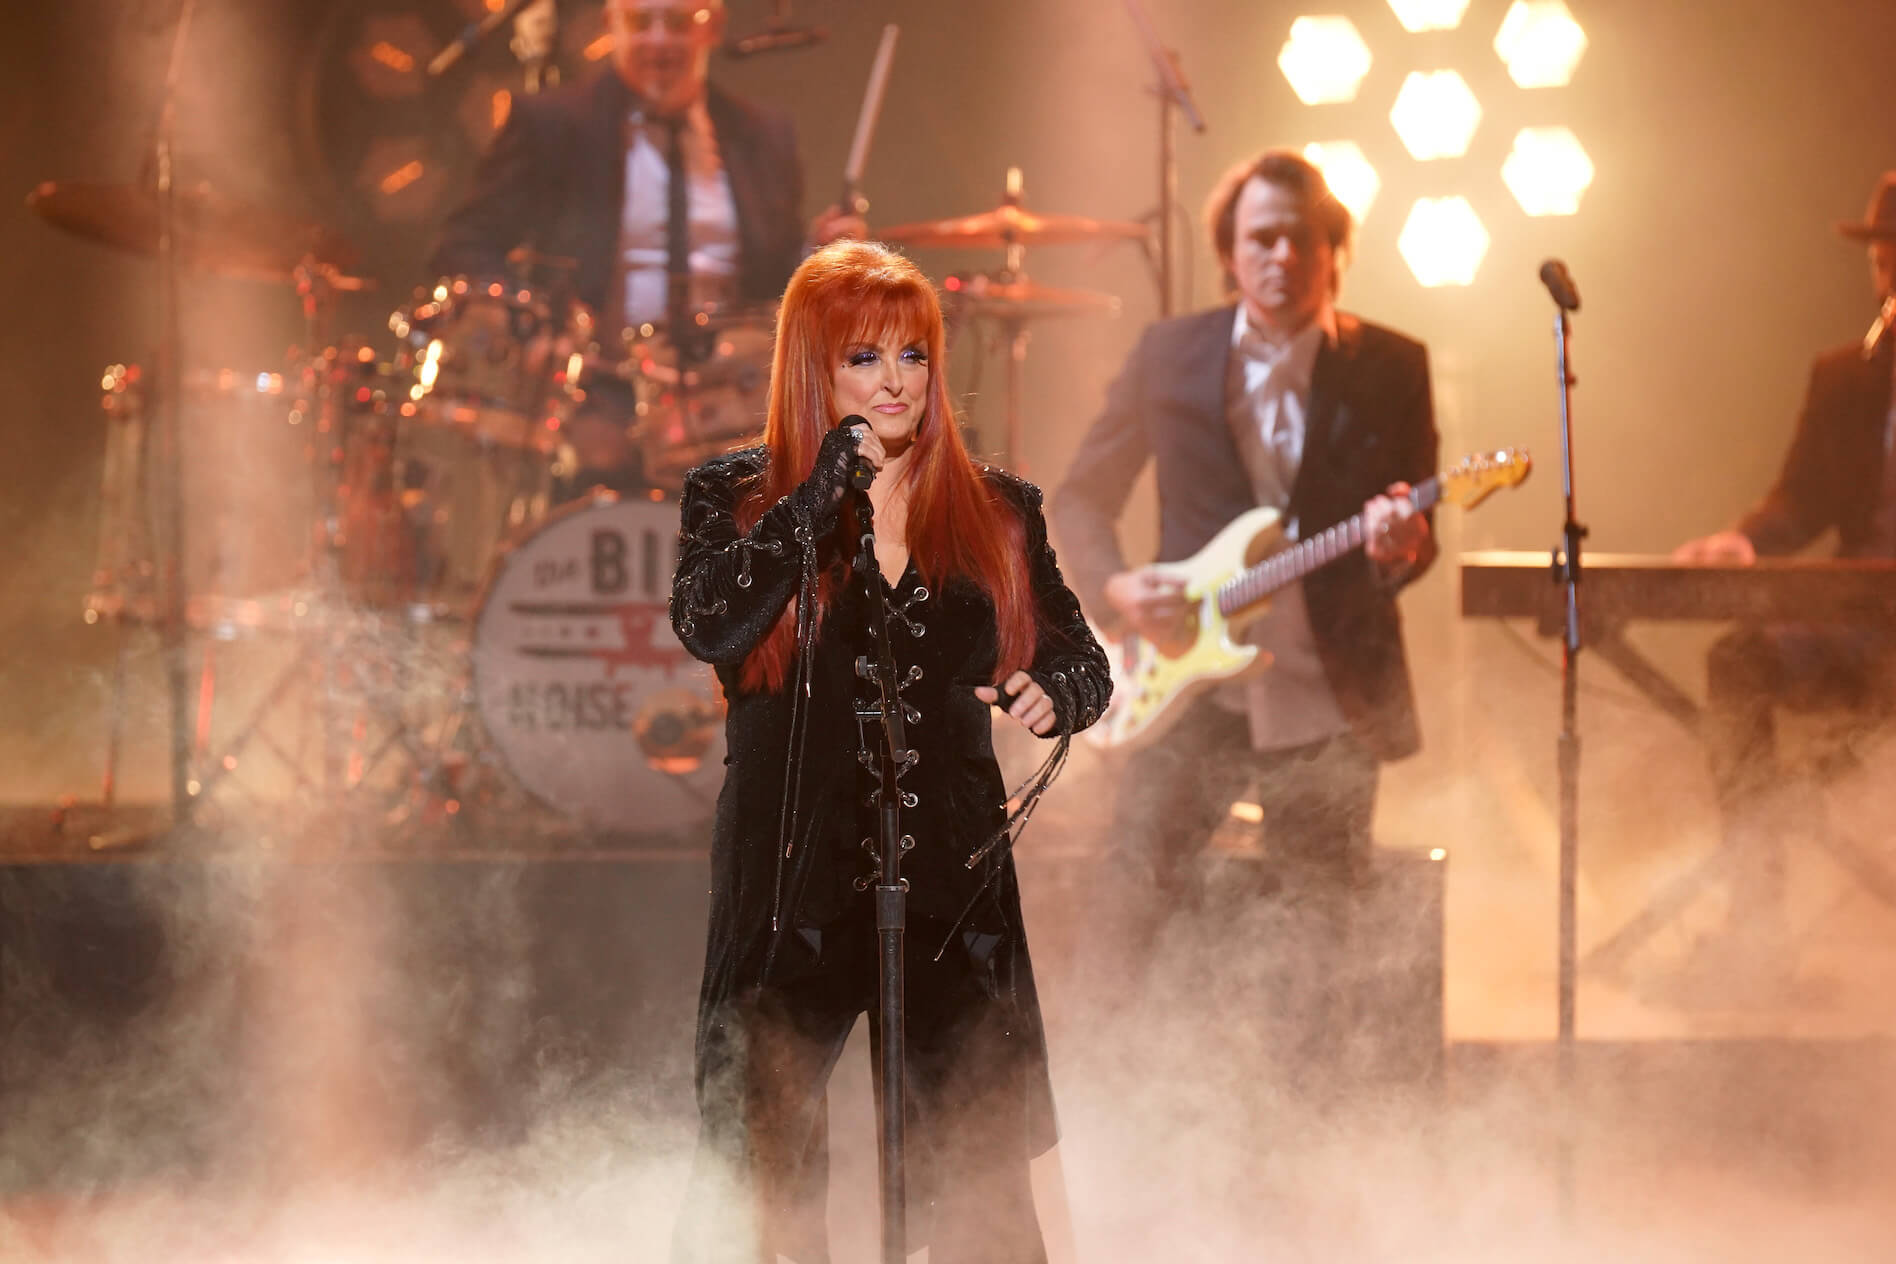 Wynonna Judd performing on stage ina cloud of fog with golden stage light behind her